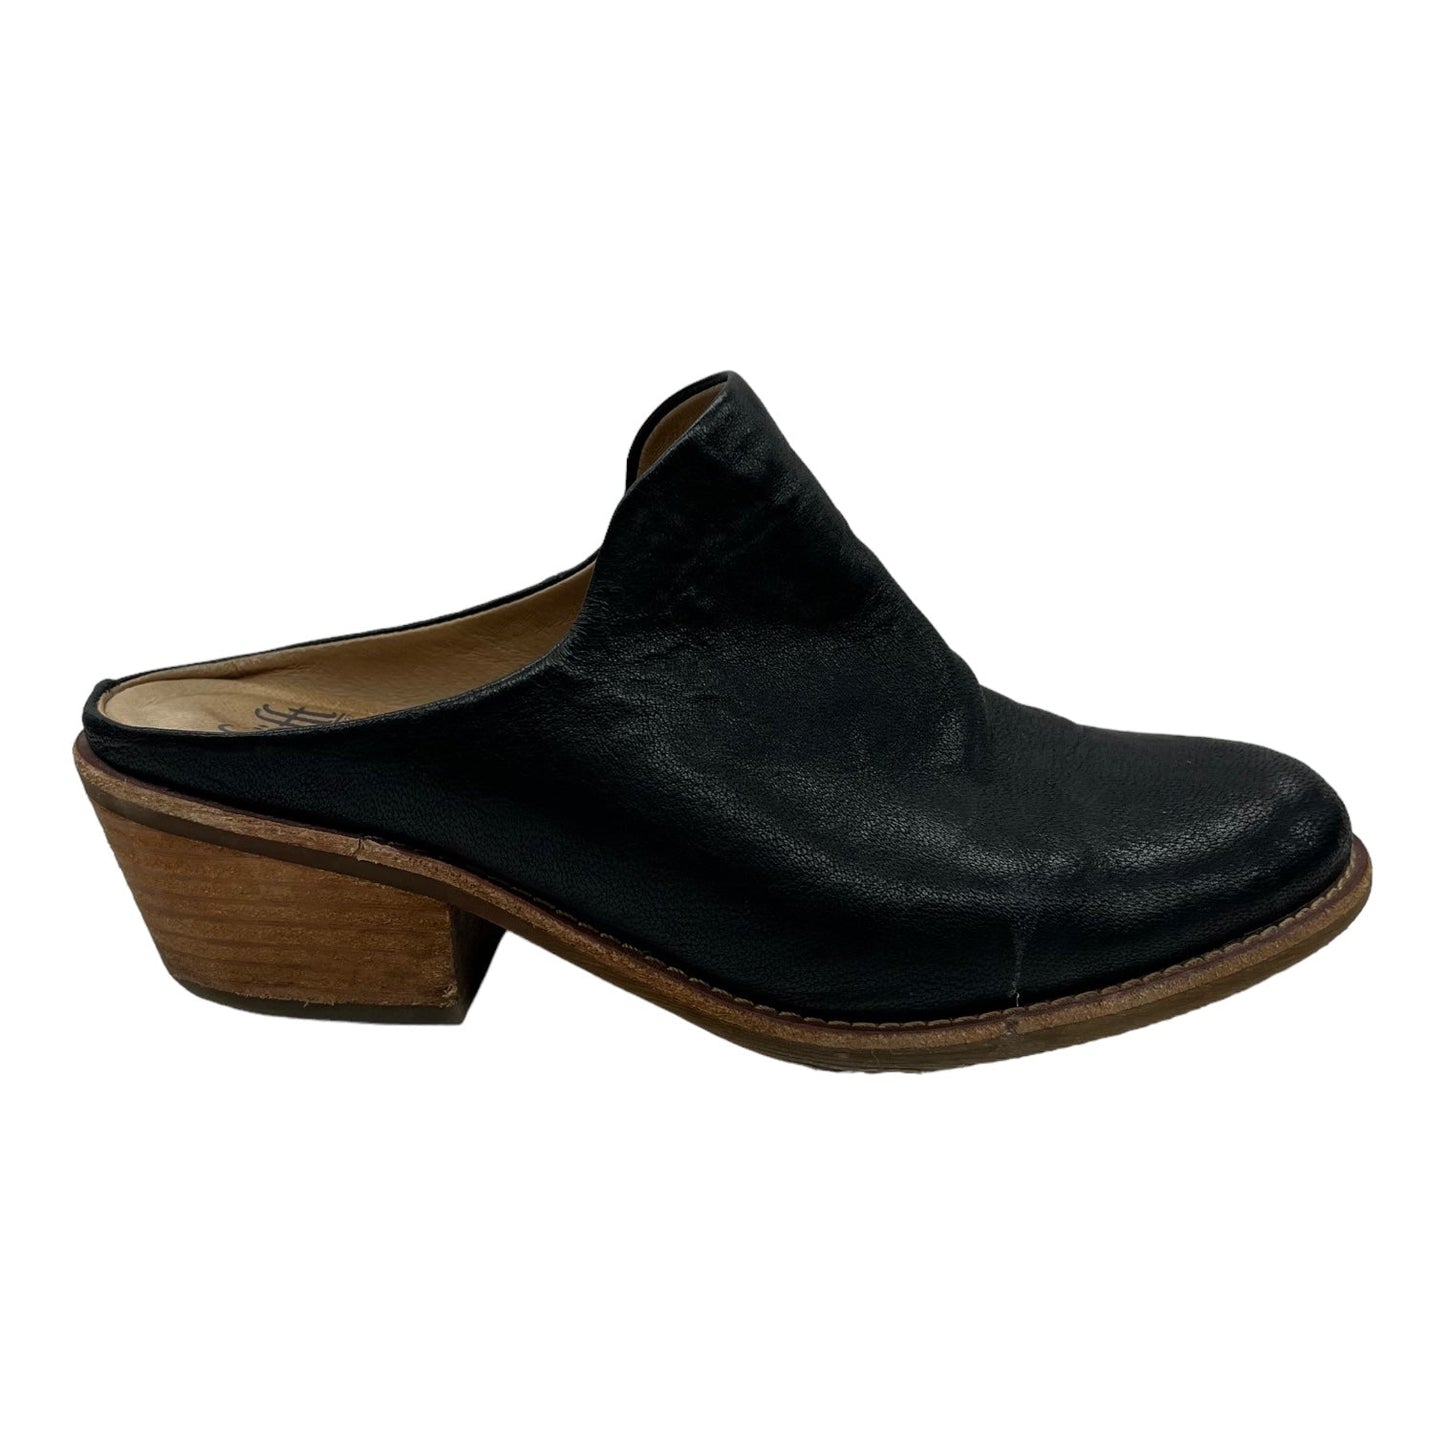 BLACK SHOES FLATS by SOFFT Size:8